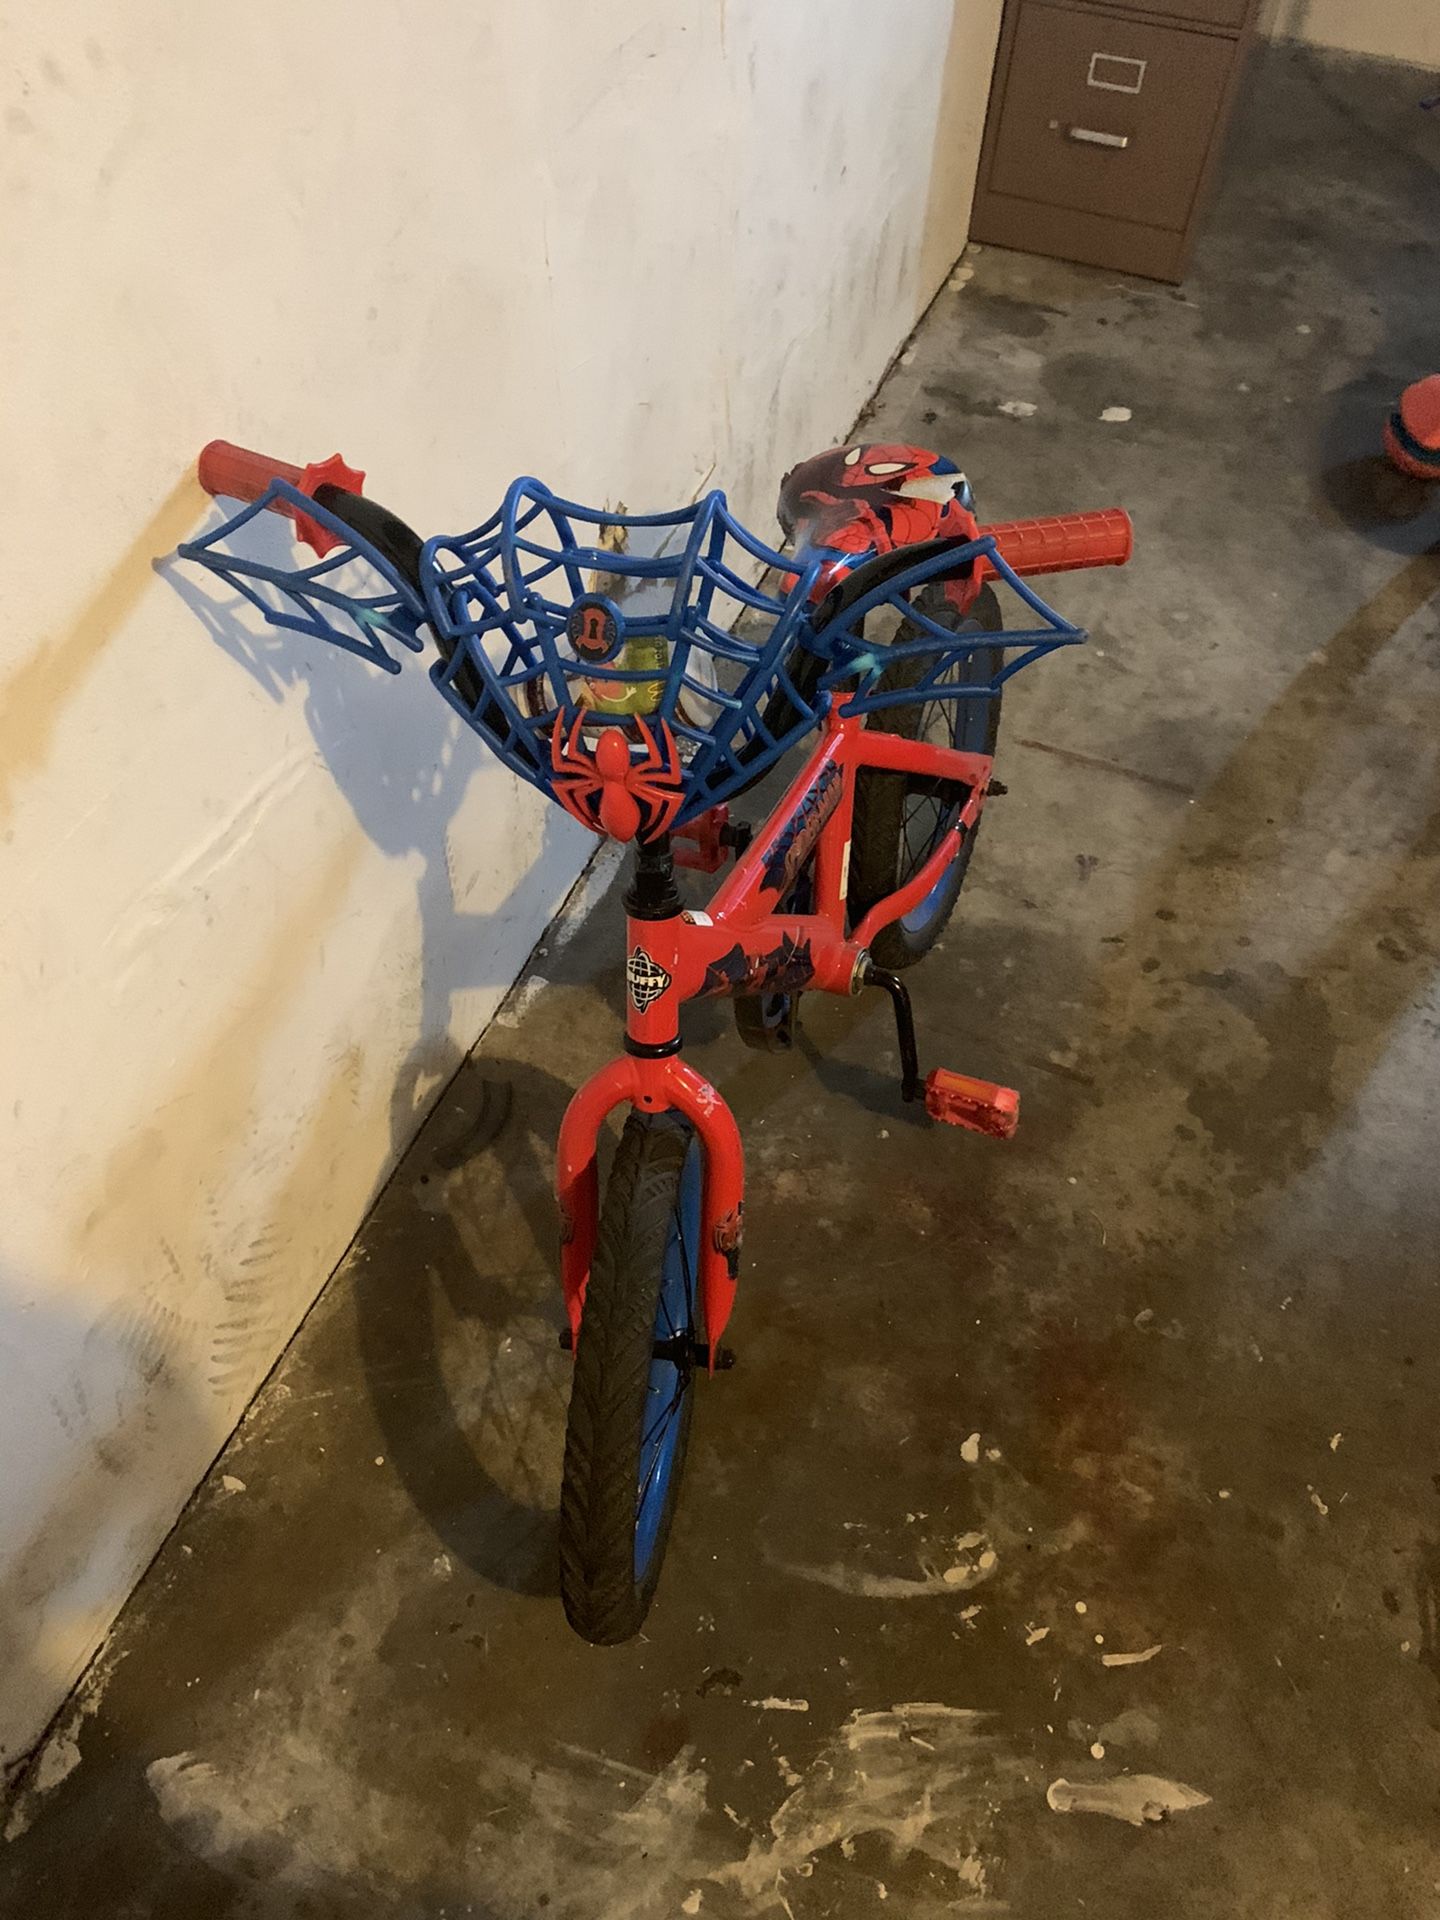 Small Kid Bicycle for sale.